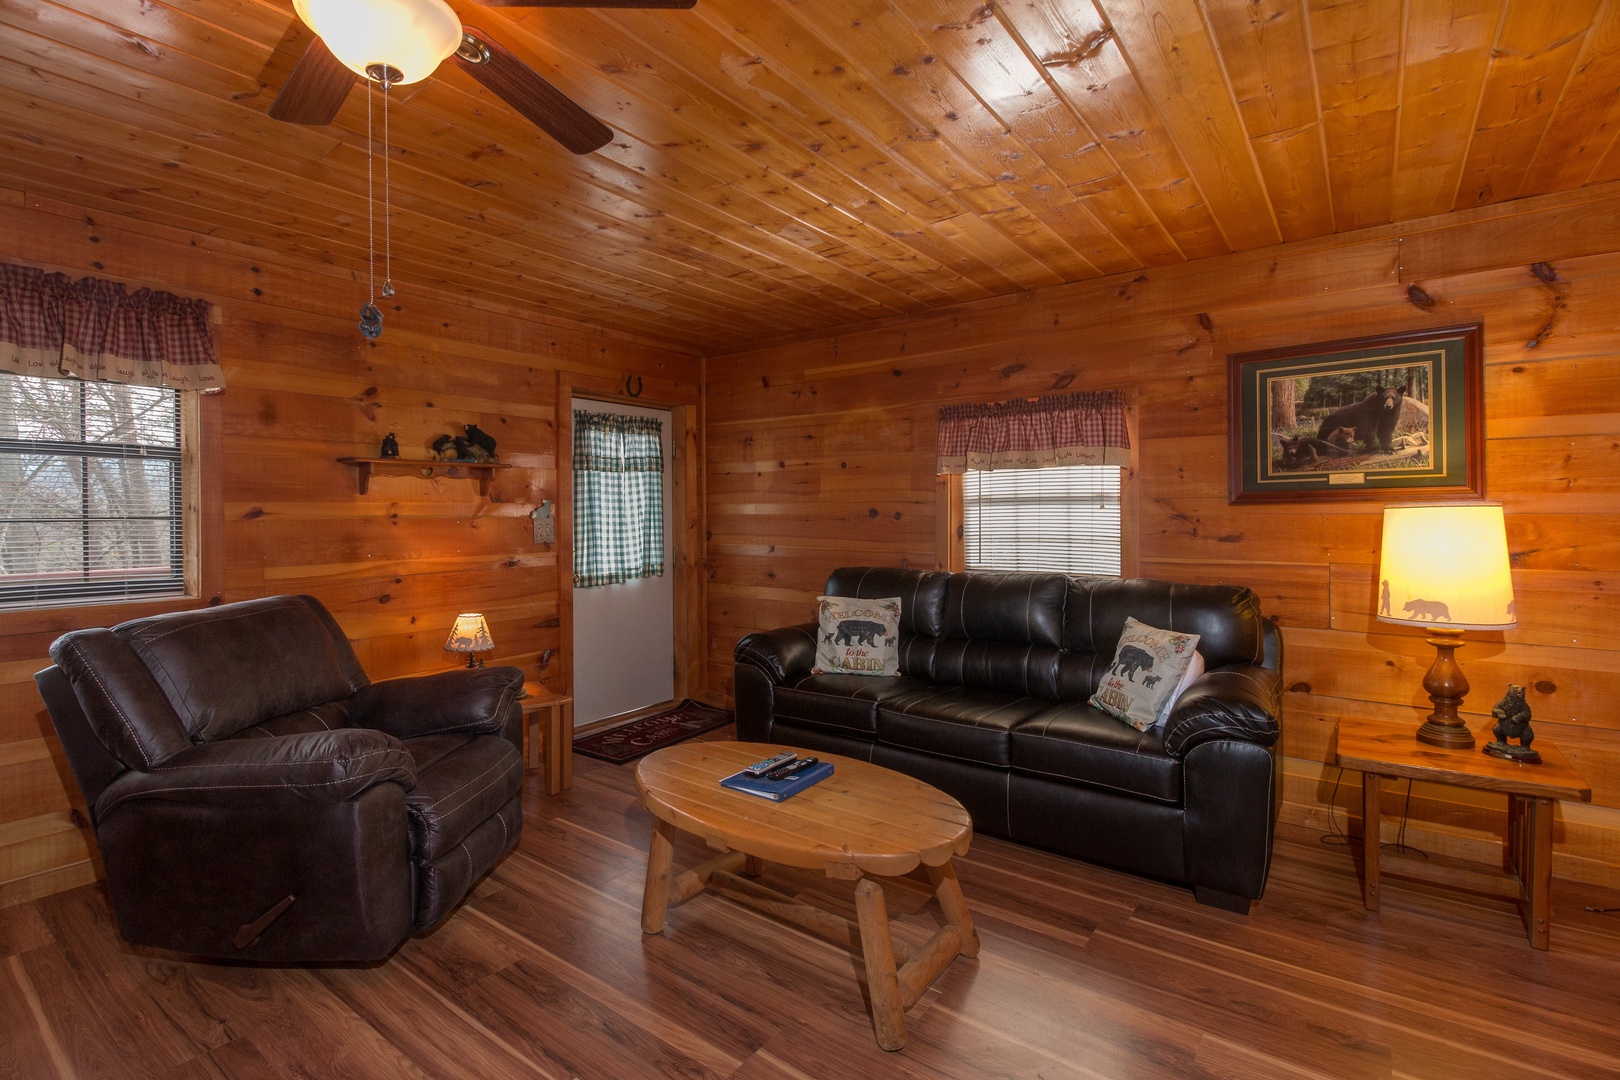 Living room with sofa and recliner at Beary Good Time, a 1-bedroom cabin rental located in Pigeon Forge